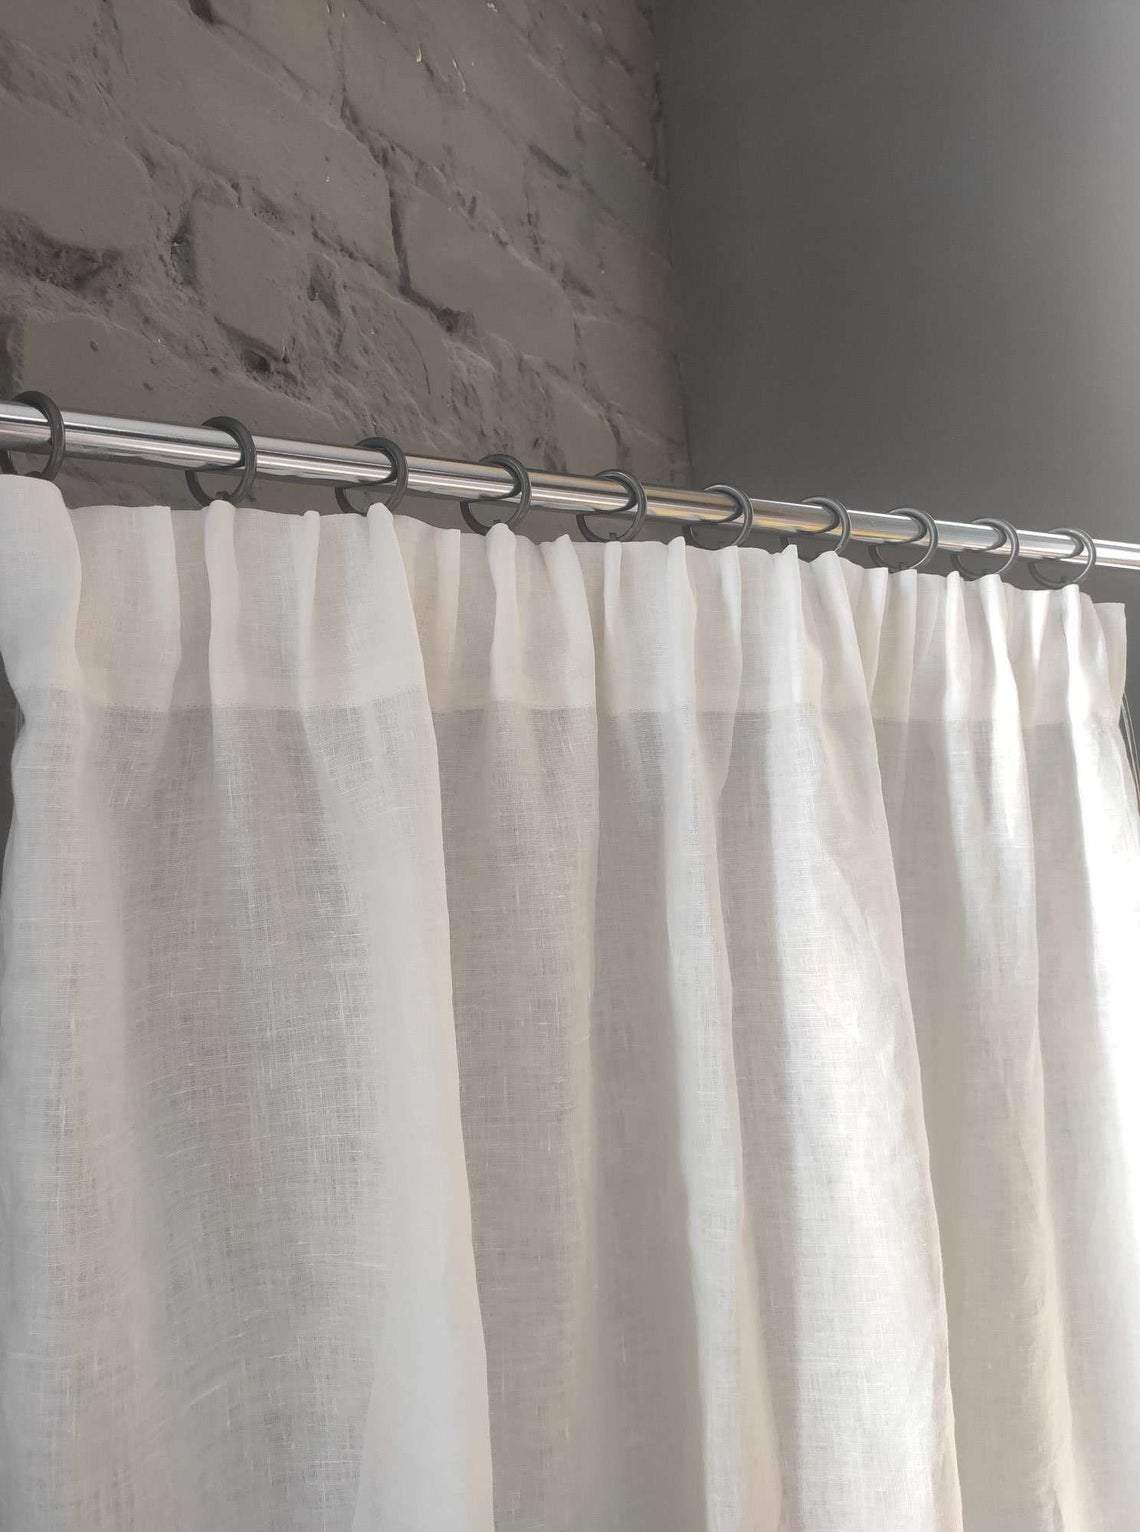 Pencil Pleat Linen Curtain Panel with Cotton Lining - Heading for Rings and Hooks - Lined Linen Privacy Curtain